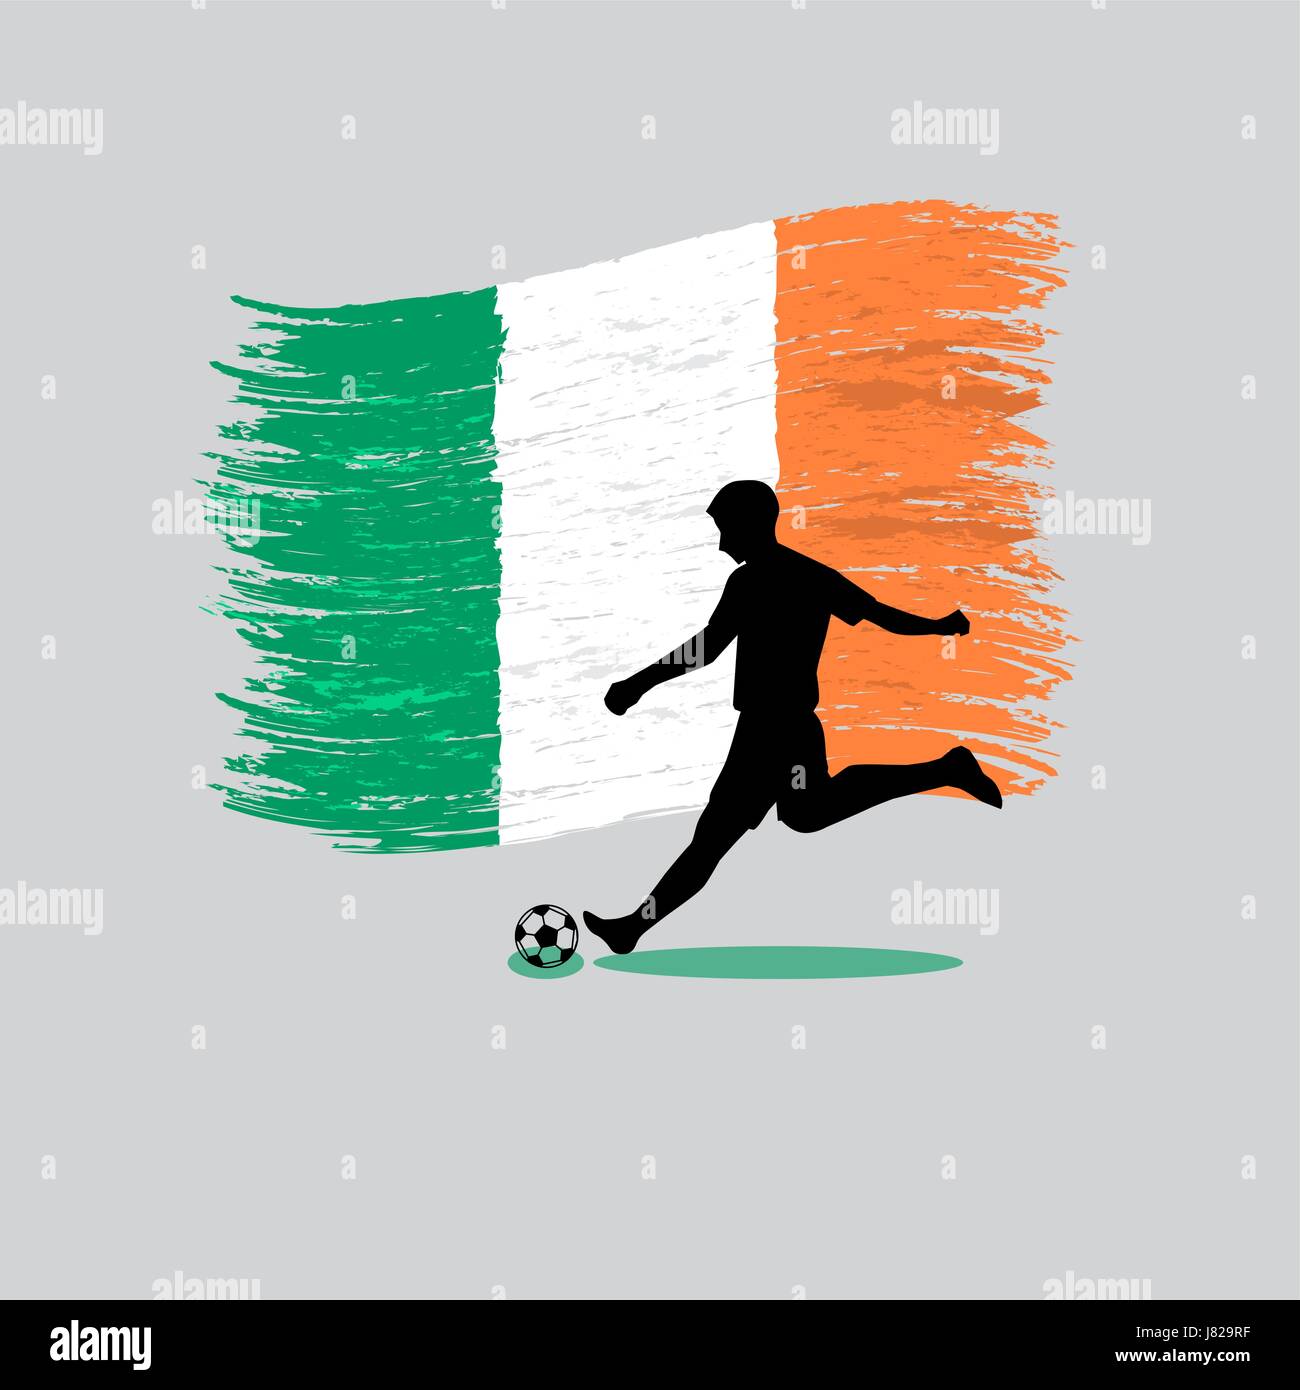 Soccer Player action with Republic of Ireland flag on background vector Stock Vector